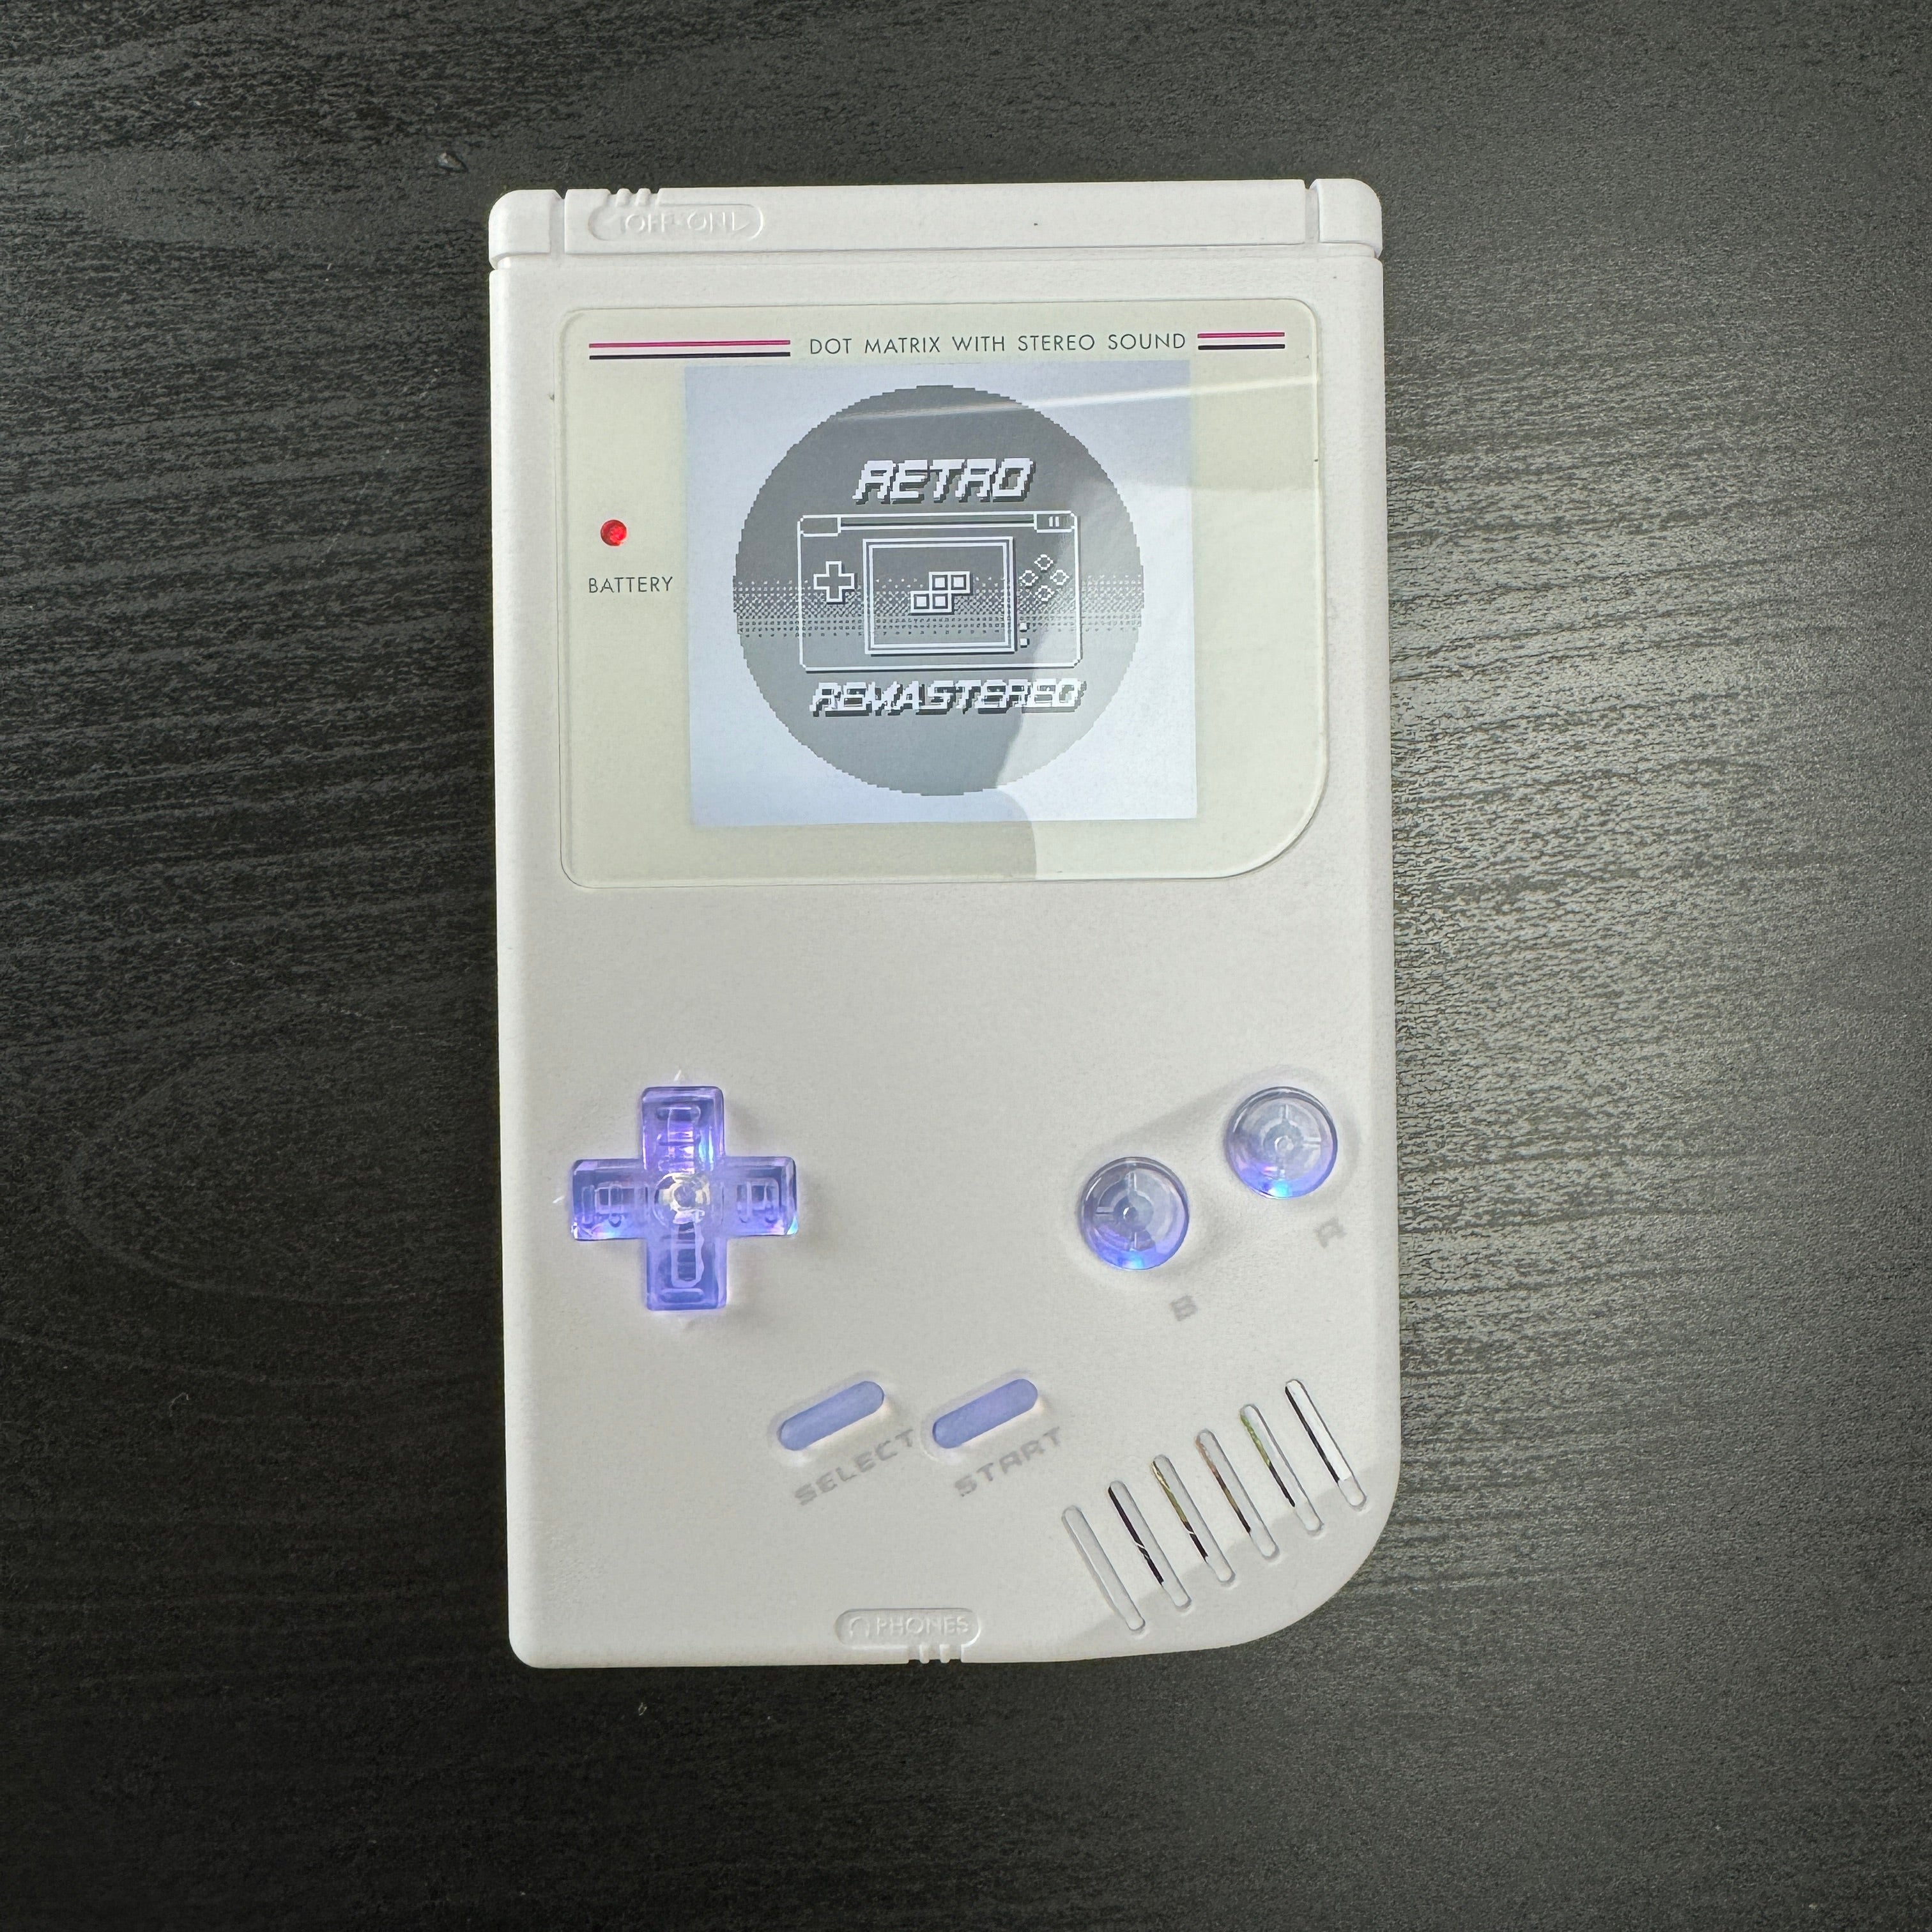 Modded DMG Game Boy w/ FP IPS Display (White with LED Buttons)